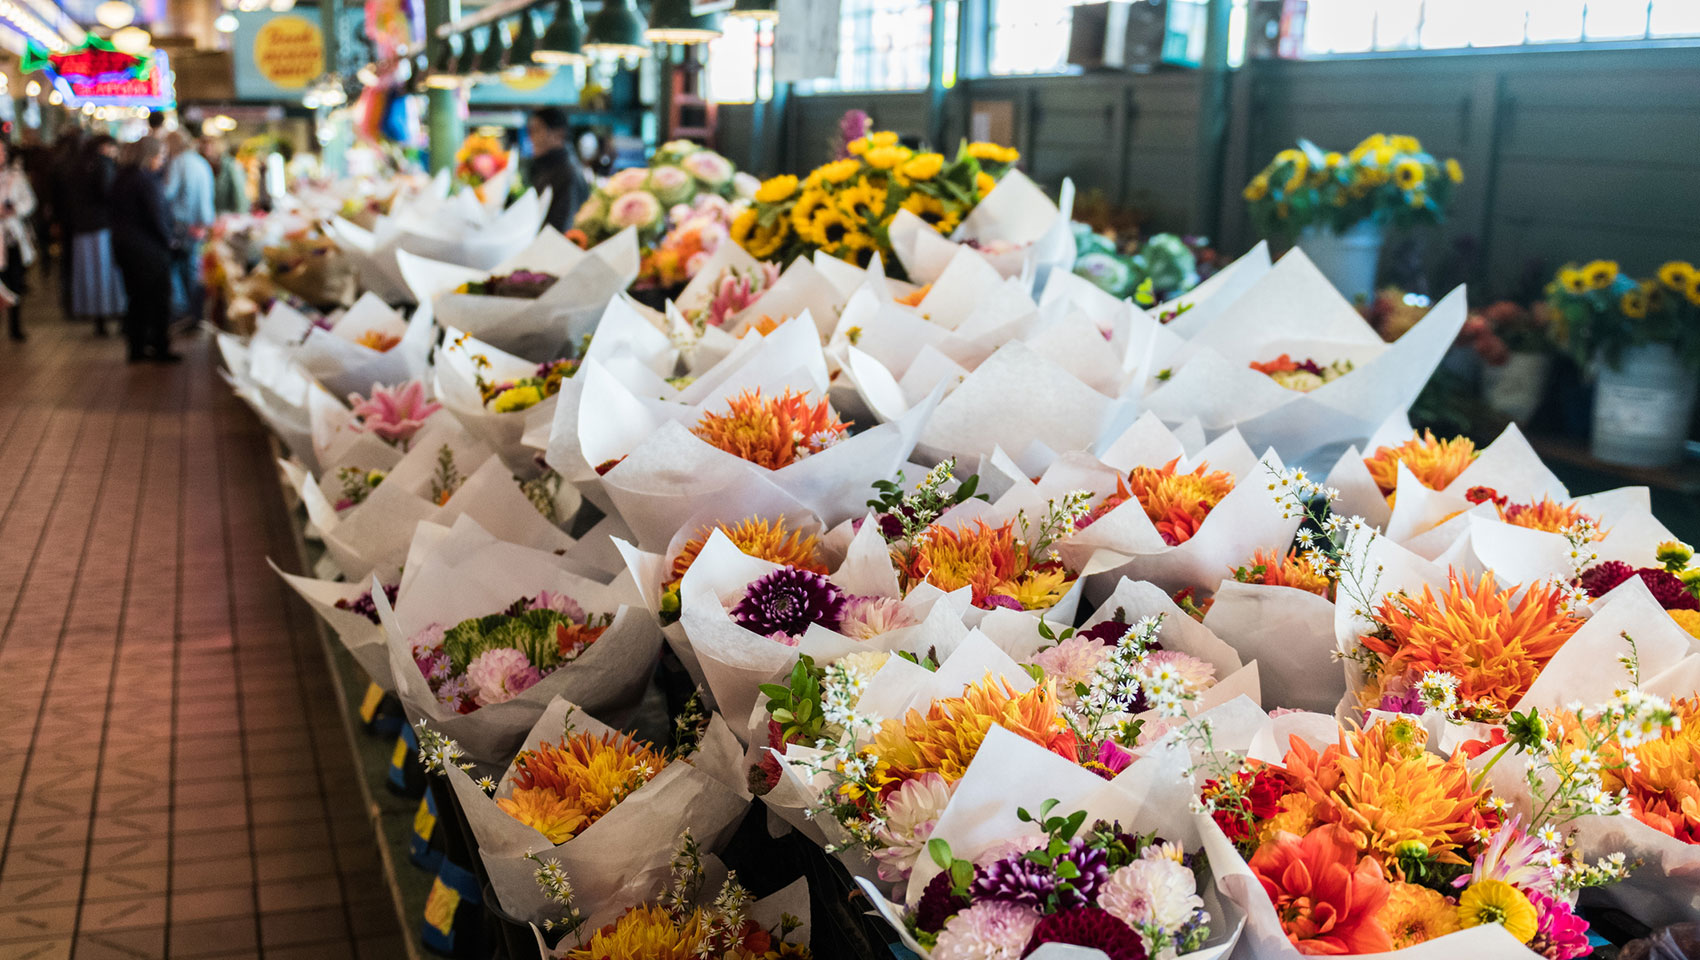 bouquets of flowers at a market